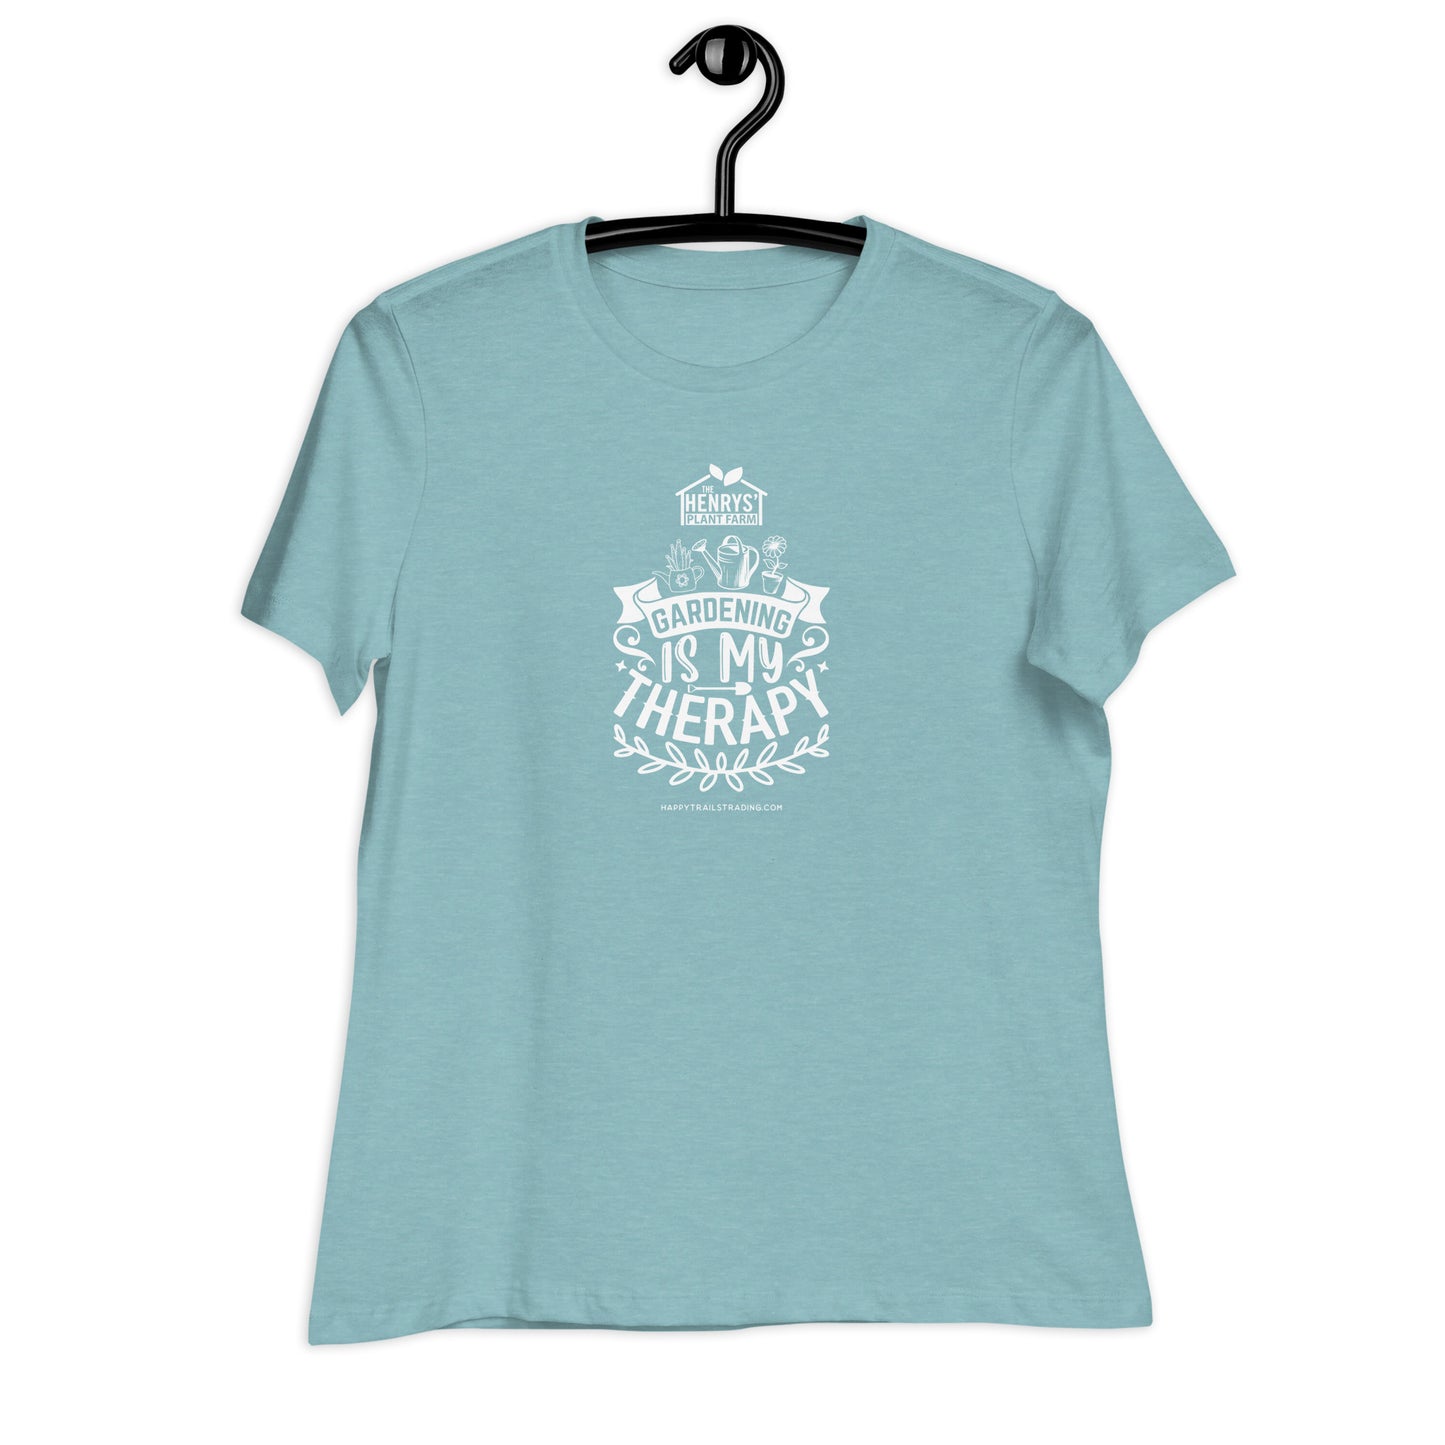 Gardening Therapy - Women's Relaxed T-Shirt